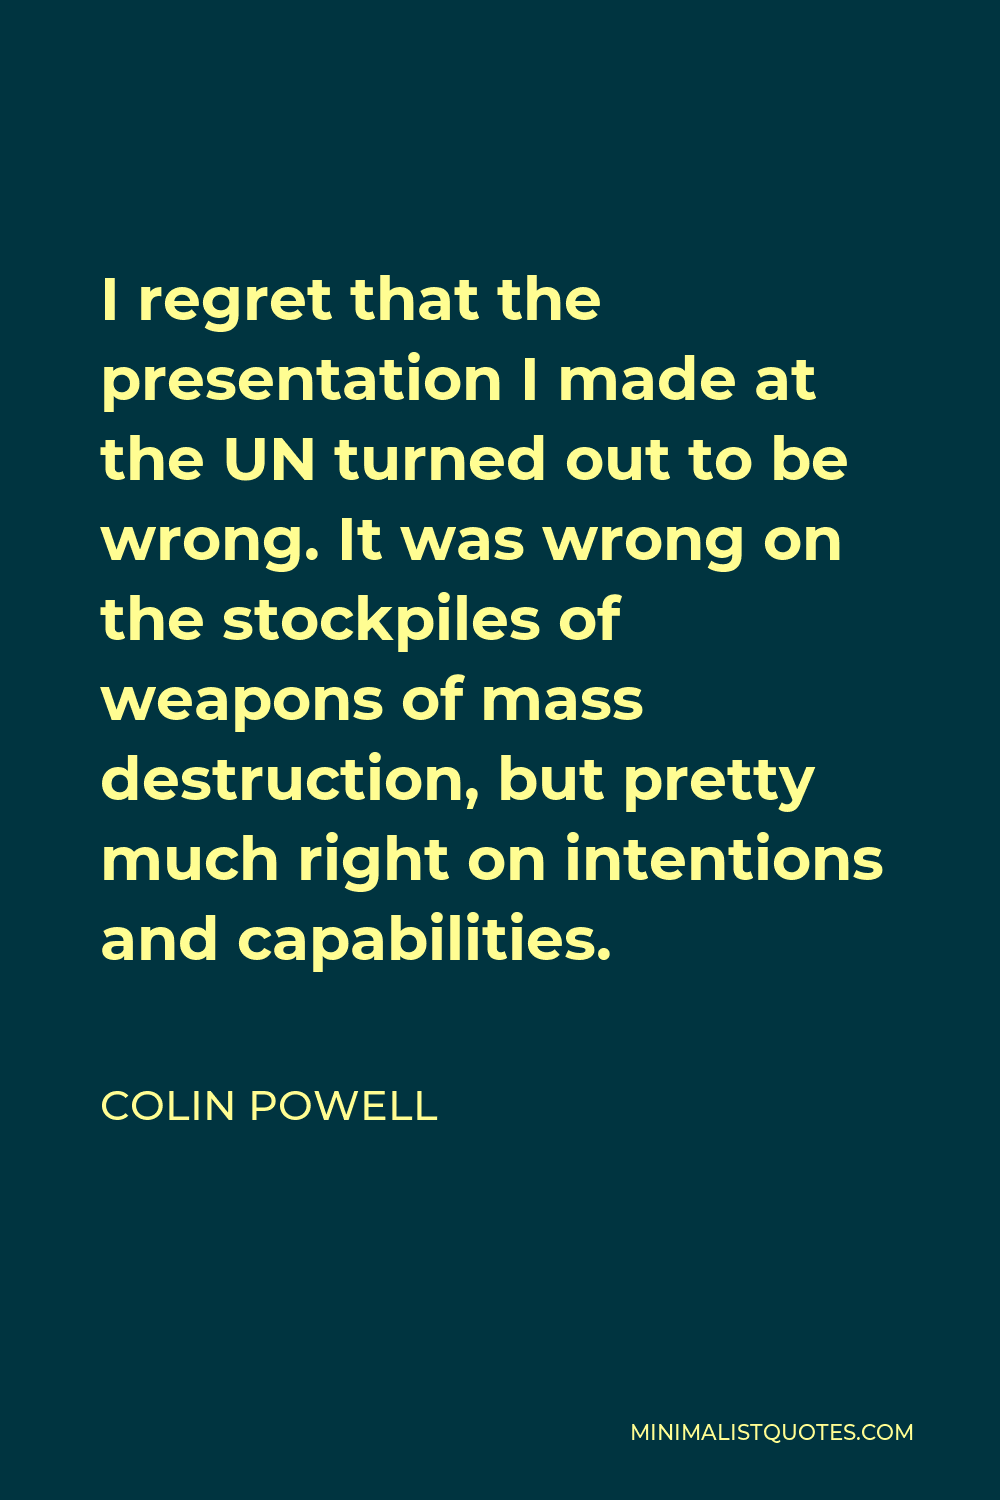 Colin Powell Quote - I regret that the presentation I made at the UN turned out to be wrong. It was wrong on the stockpiles of weapons of mass destruction, but pretty much right on intentions and capabilities.